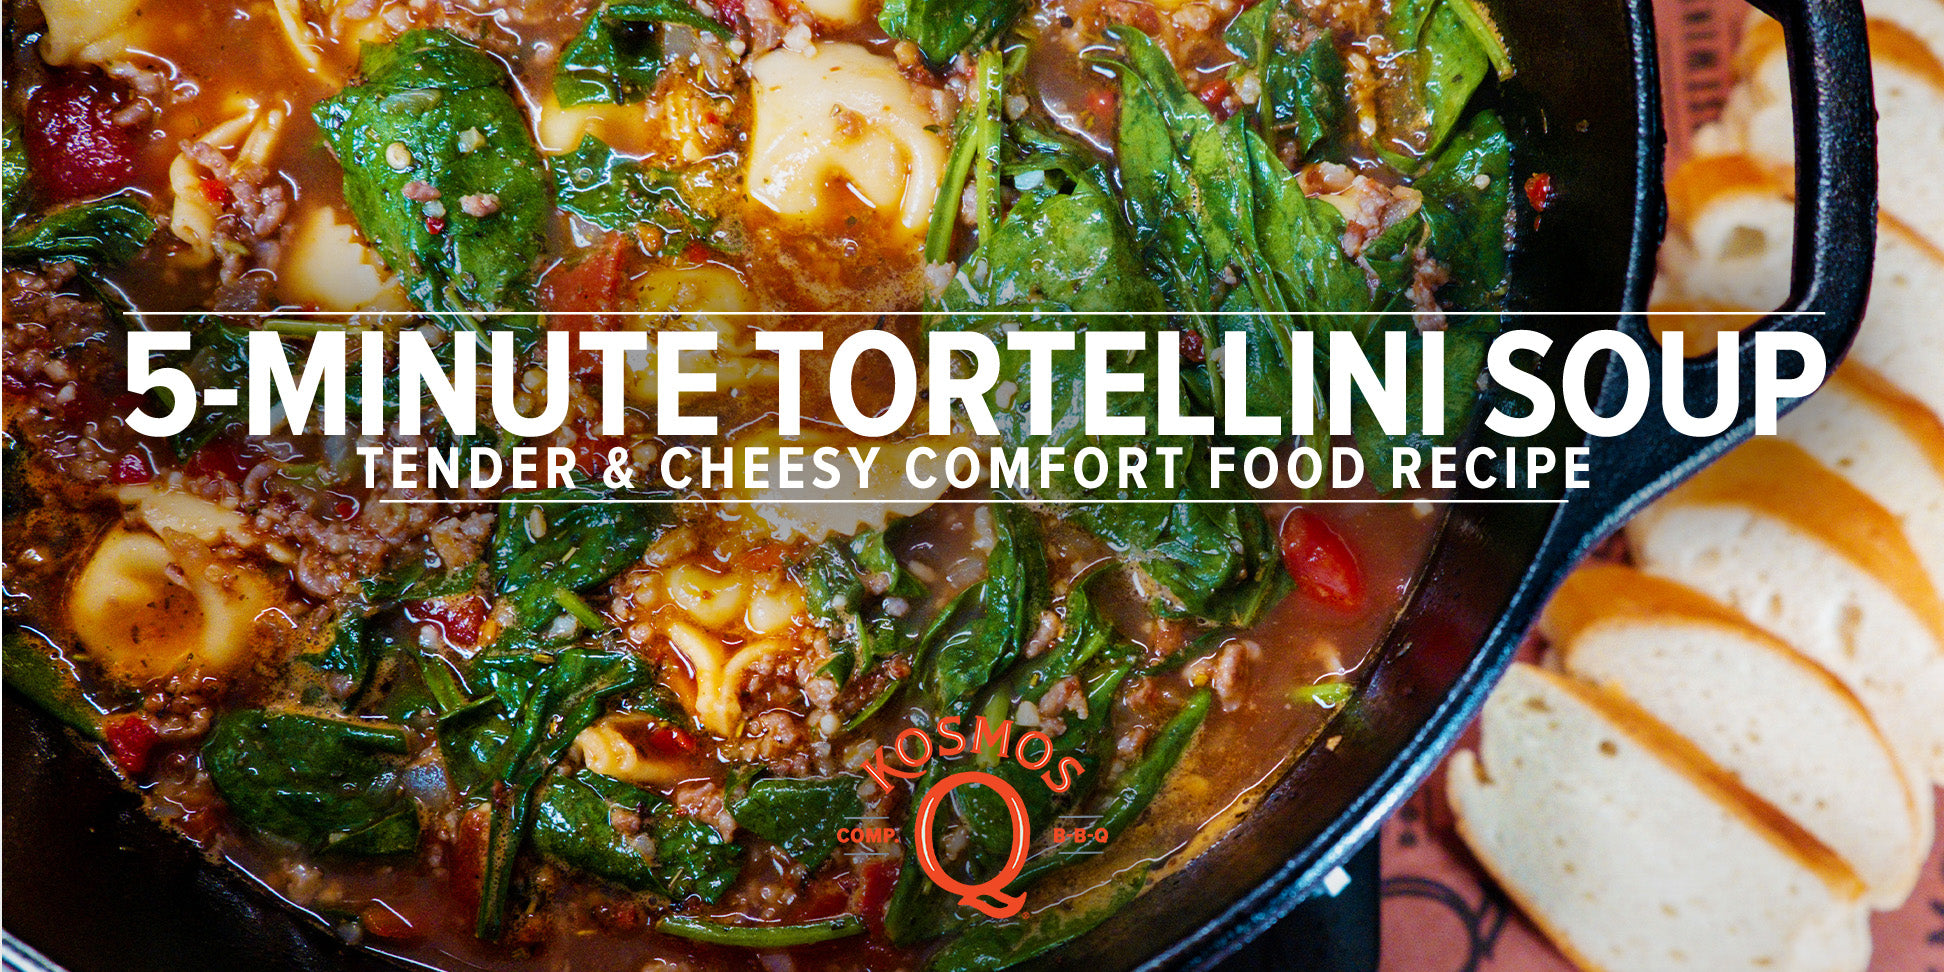 How to Make 5-Minute Tortellini Soup!